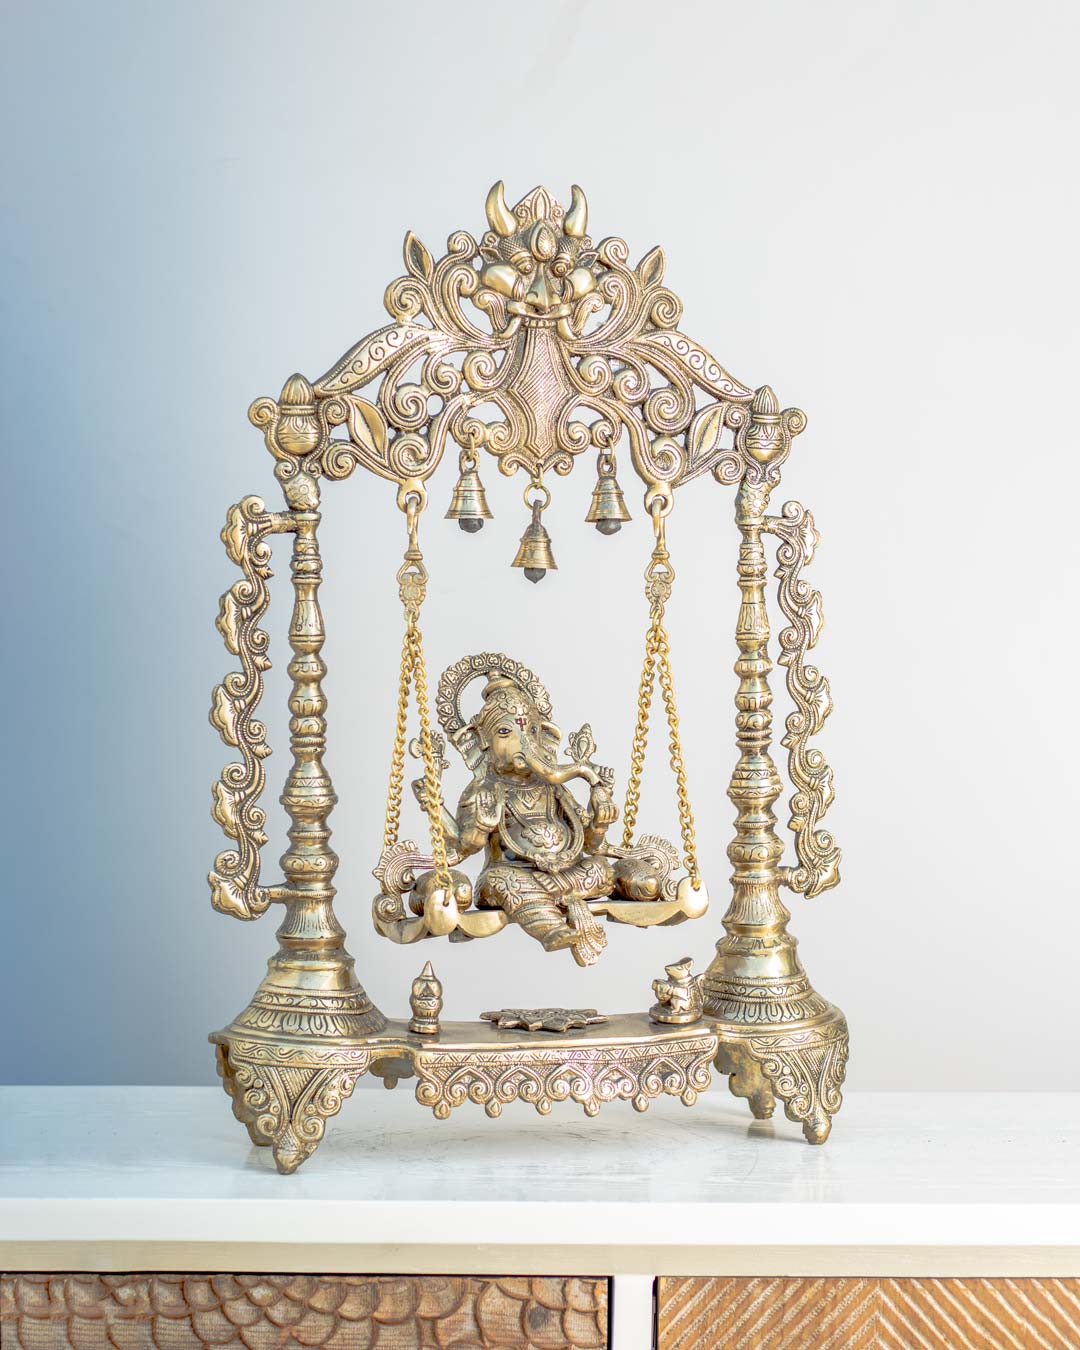 Marvelous 'lord Ganesh' Table Top sculpture